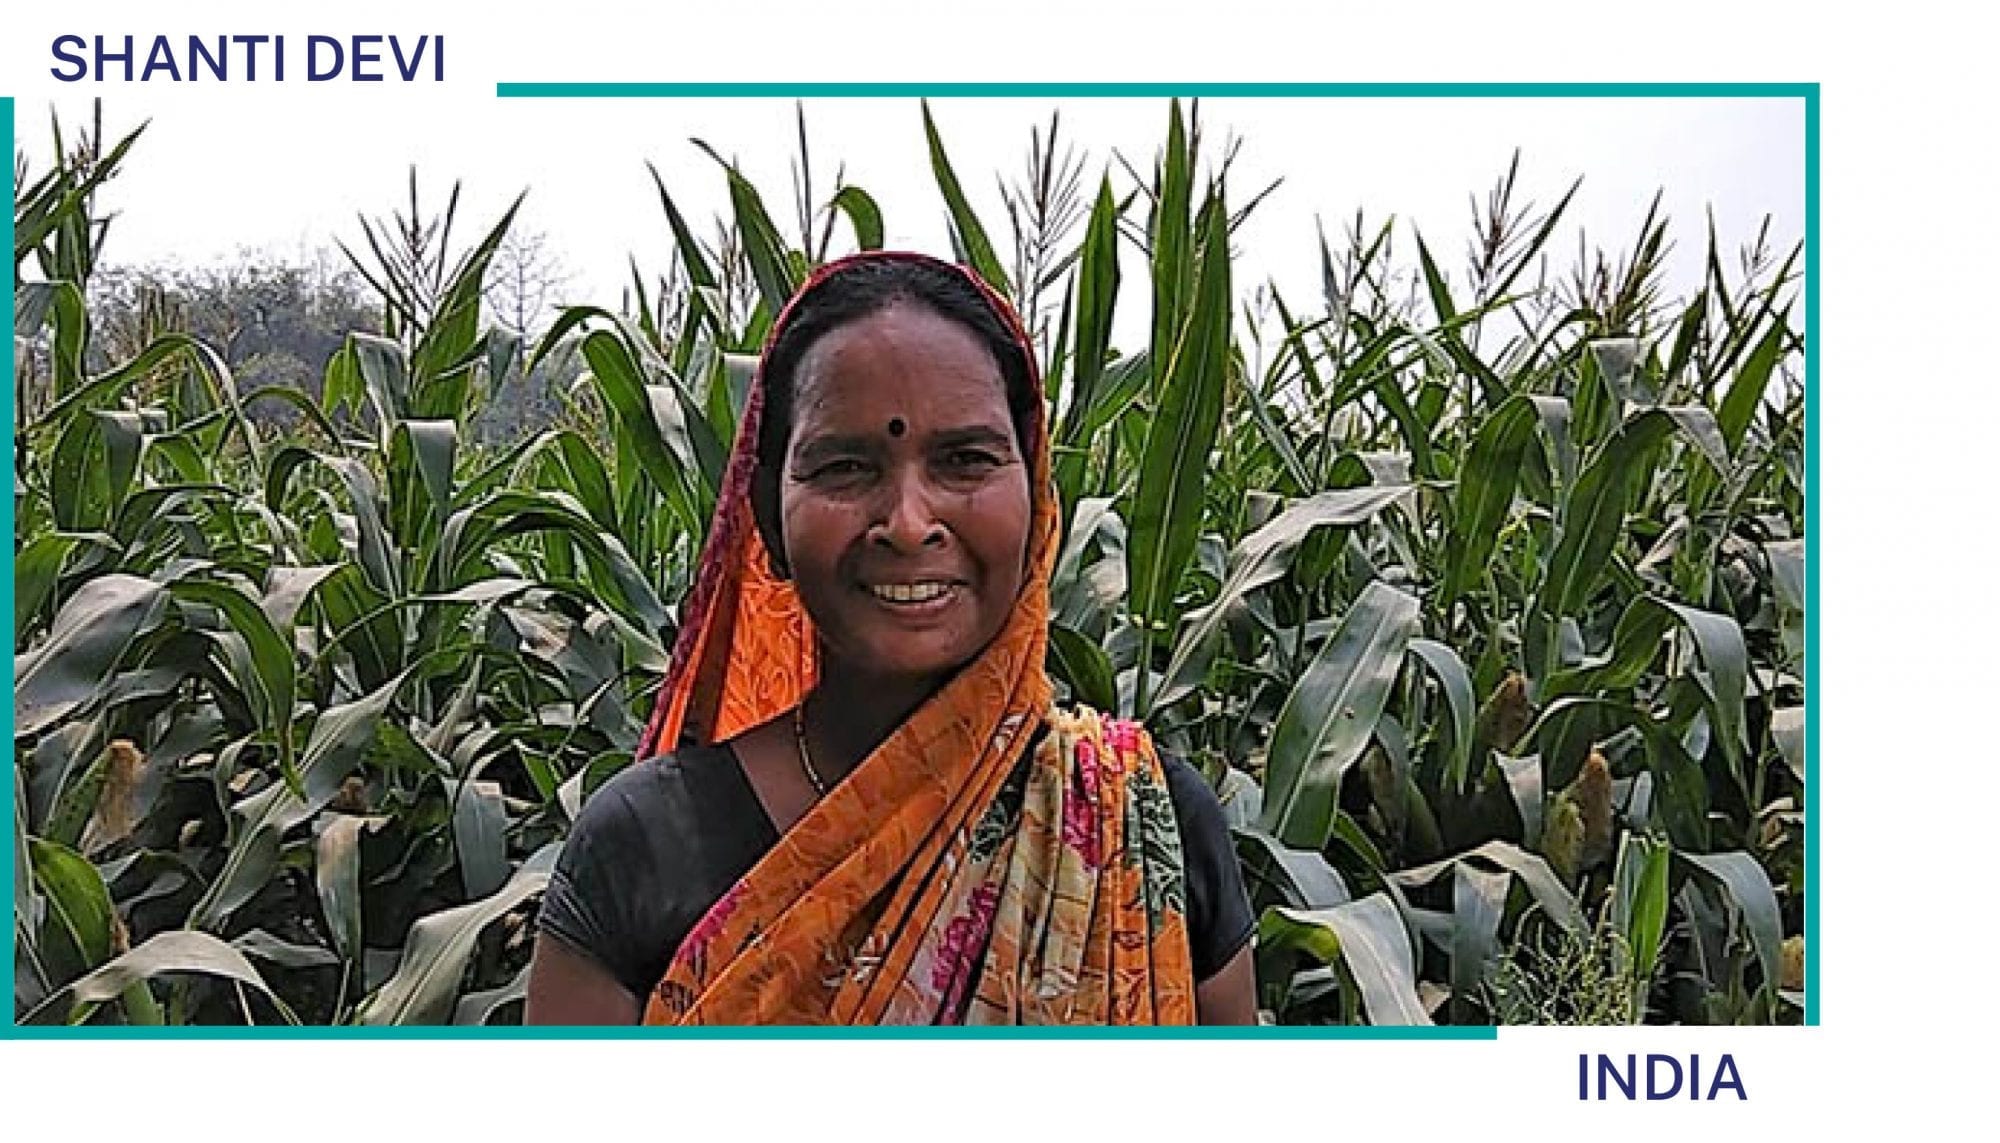 Shanti Devi stands on her farm in India